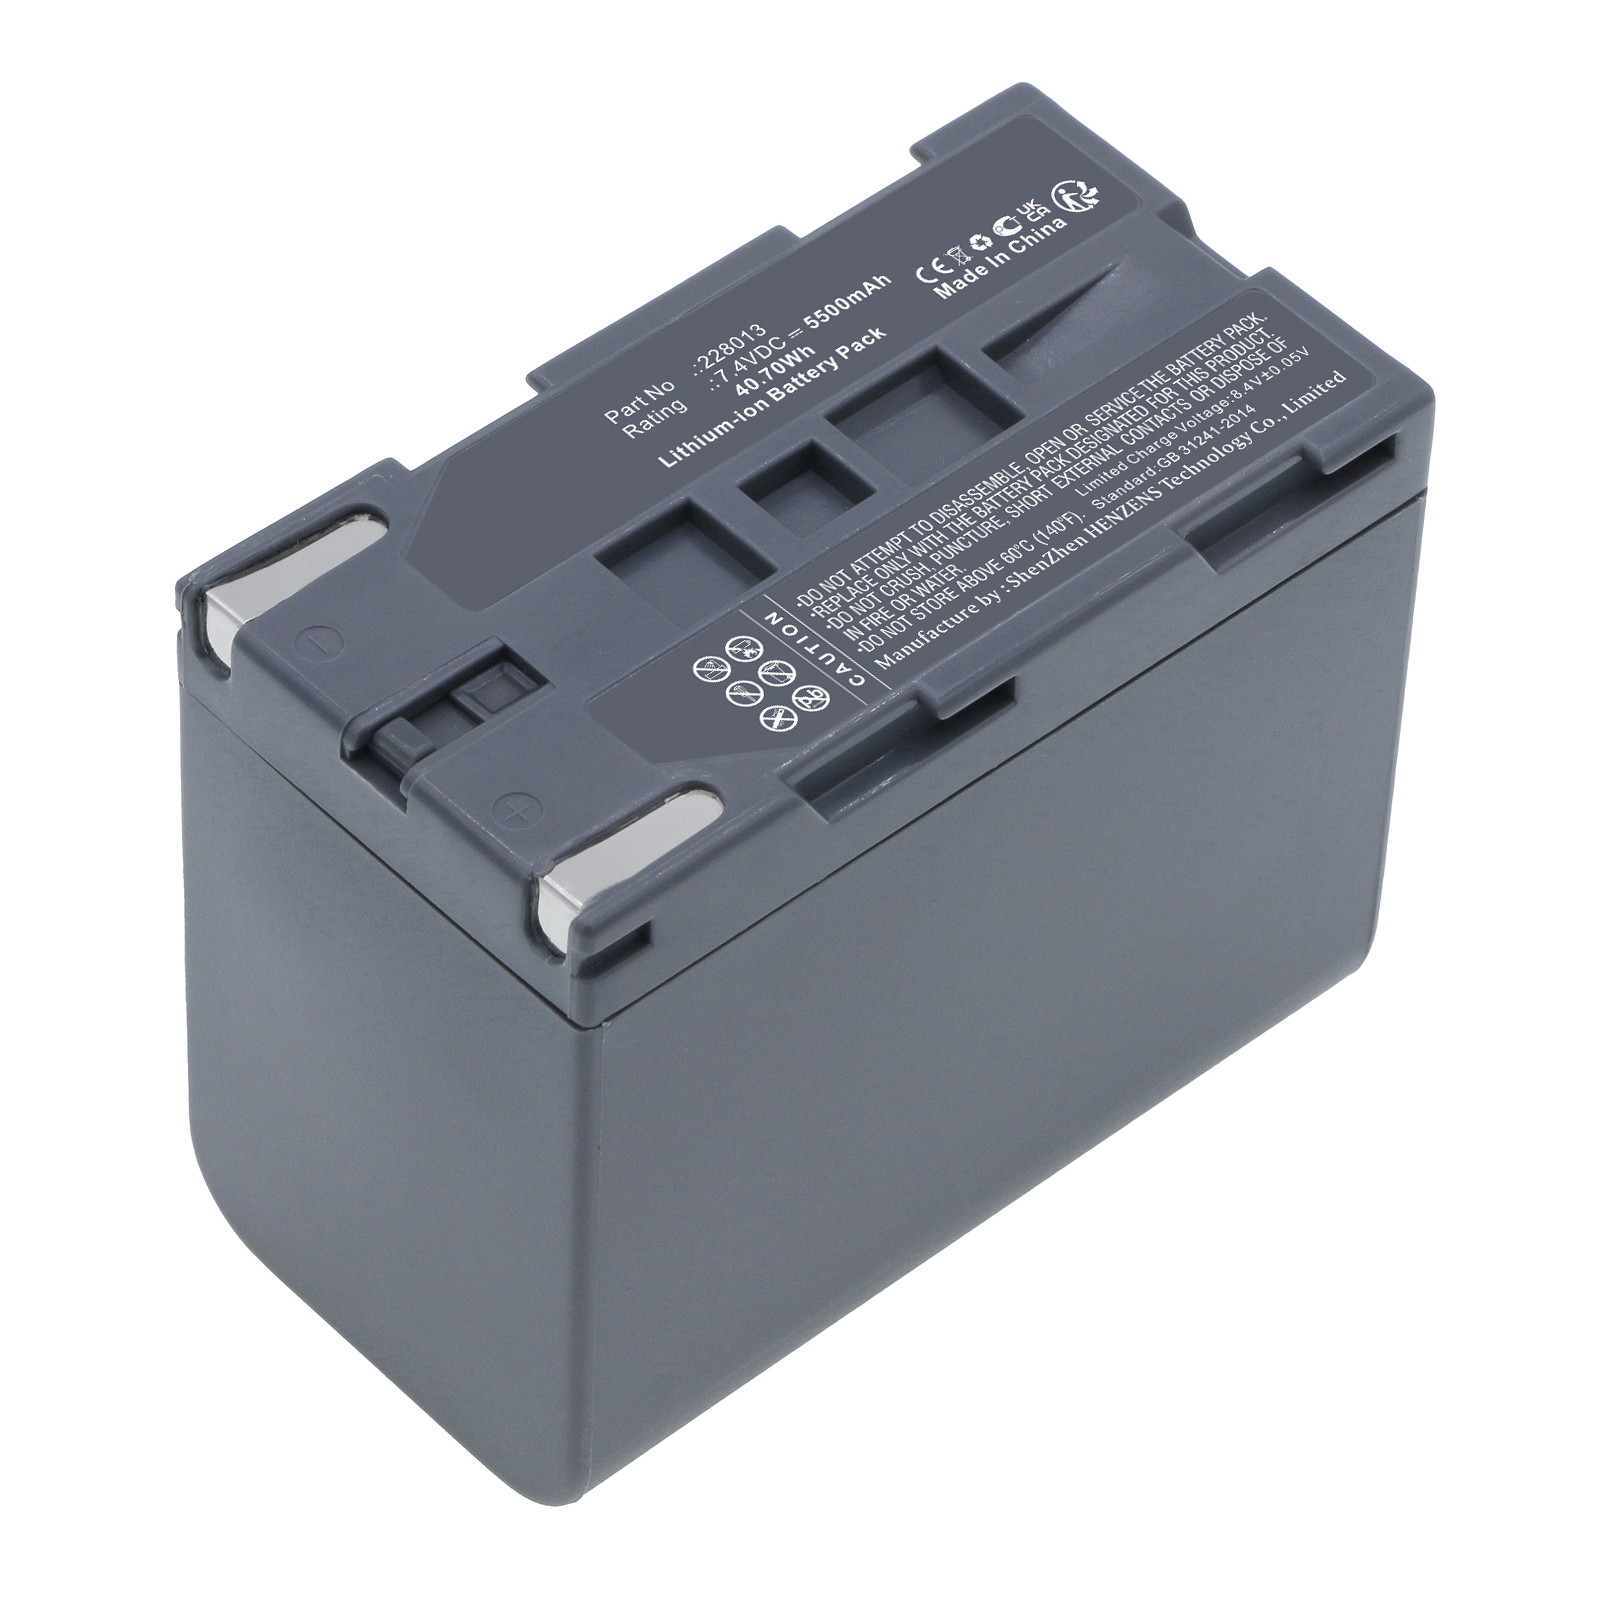 Batteries for Softing ITEquipment